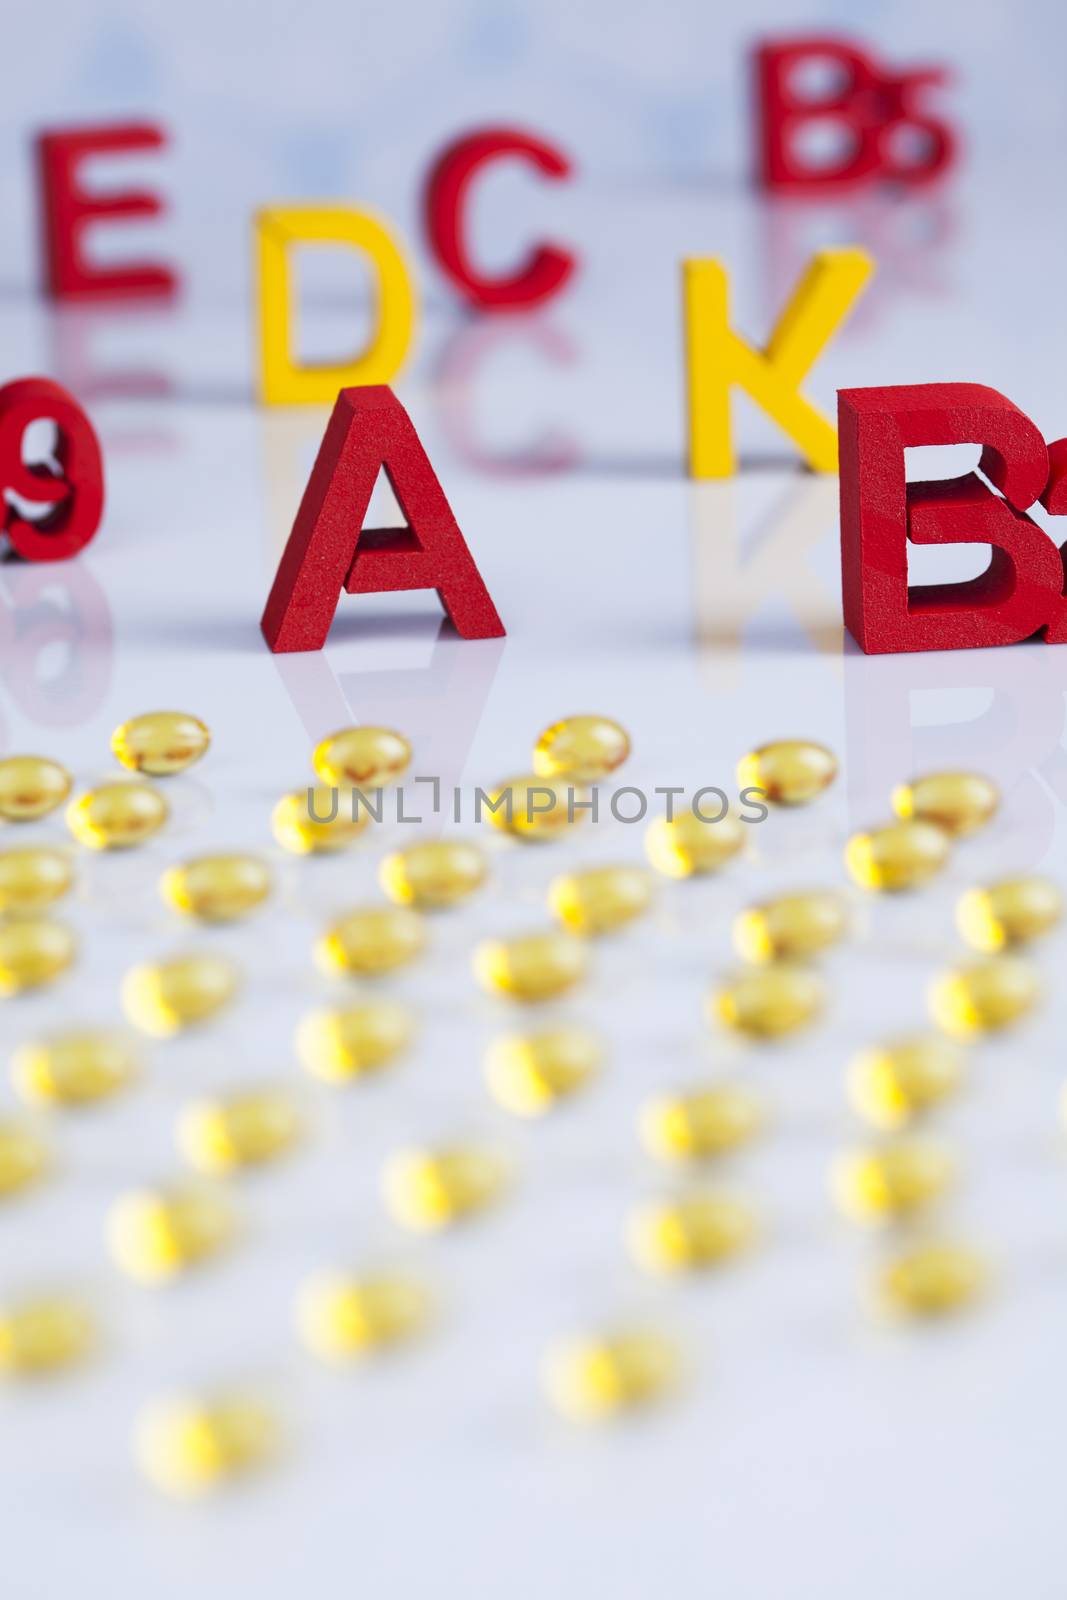 Medicine and healthy, Close up of capsules background